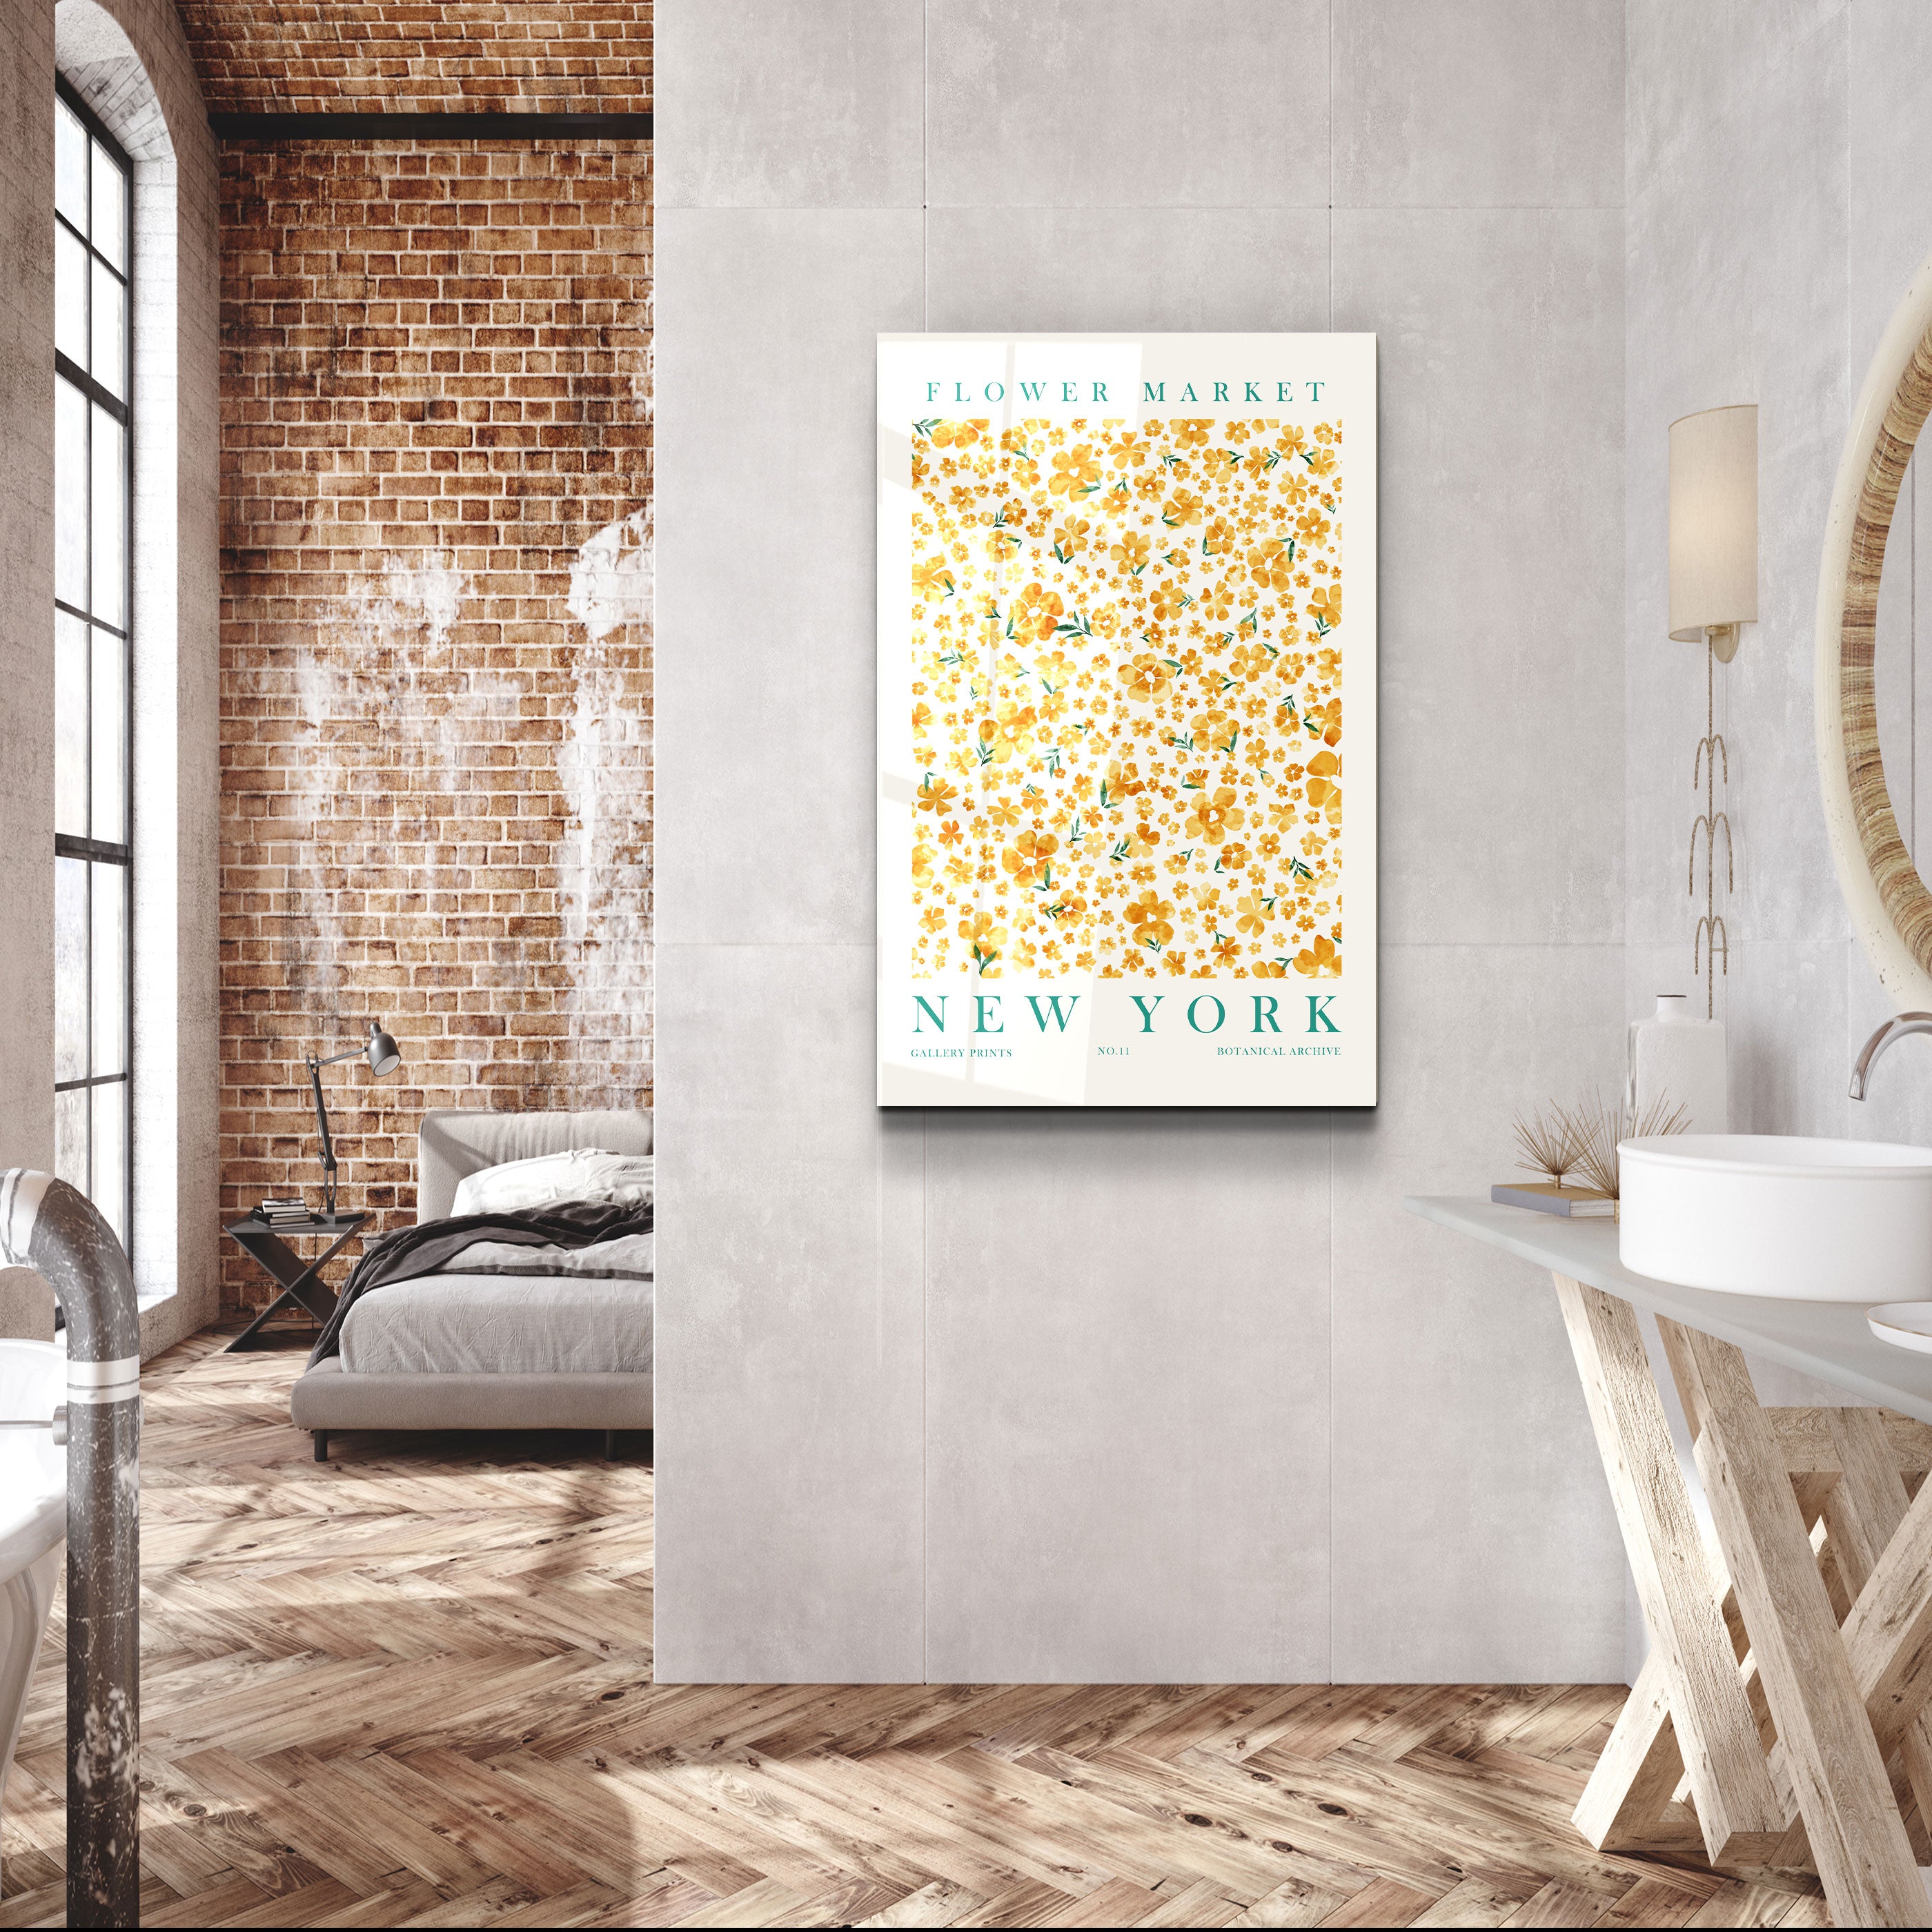 ・"Flower Market No:11 New York"・Gallery Print Collection Glass Wall Art